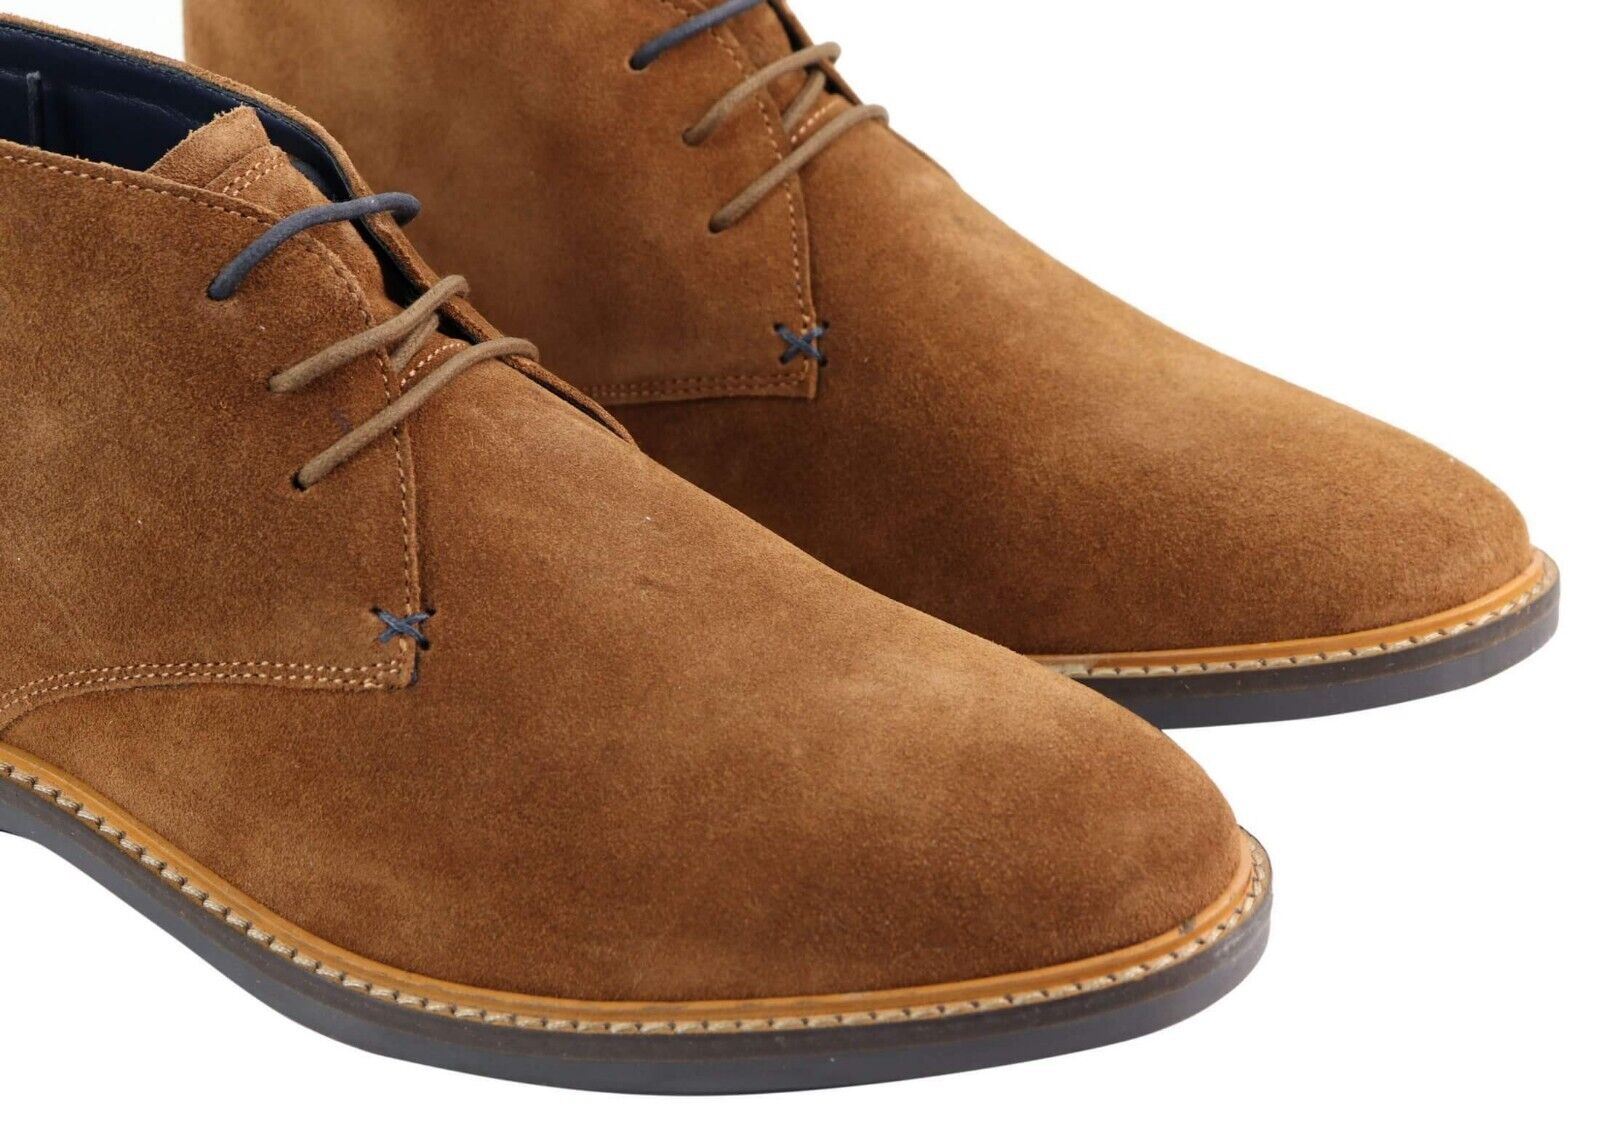 Mens Tan Suede Lace Up Chukka Boots - Upperclass Fashions 